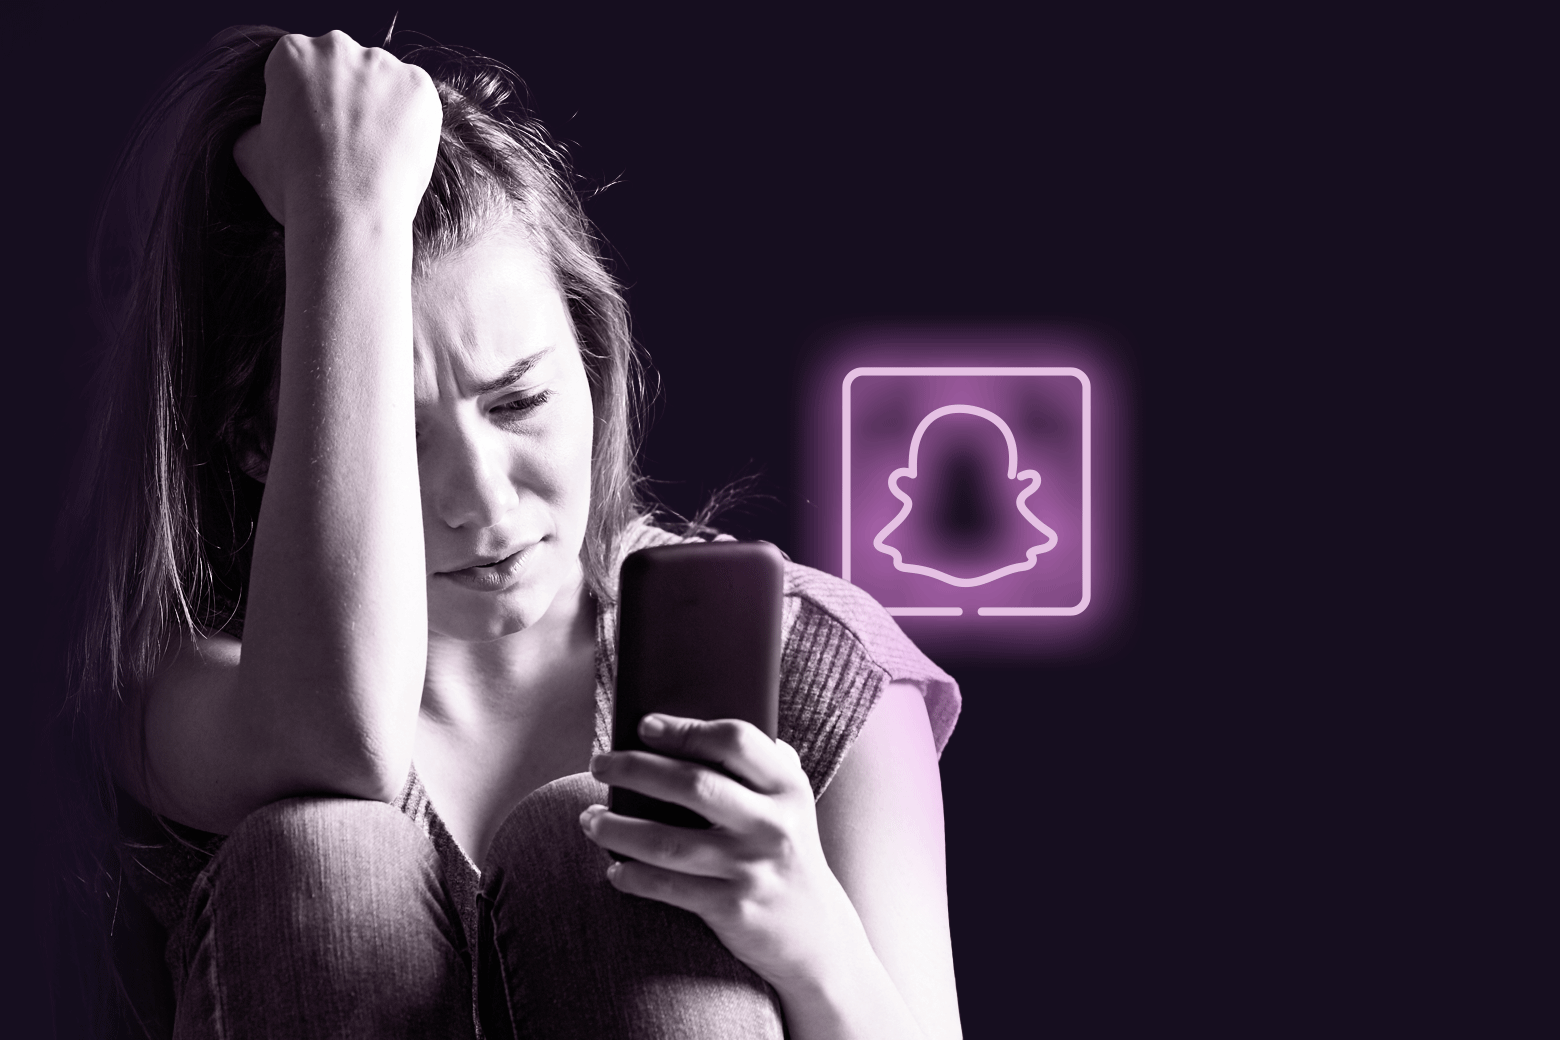 Woman looking distressed at her phone. A Snapchat logo floats next to her.